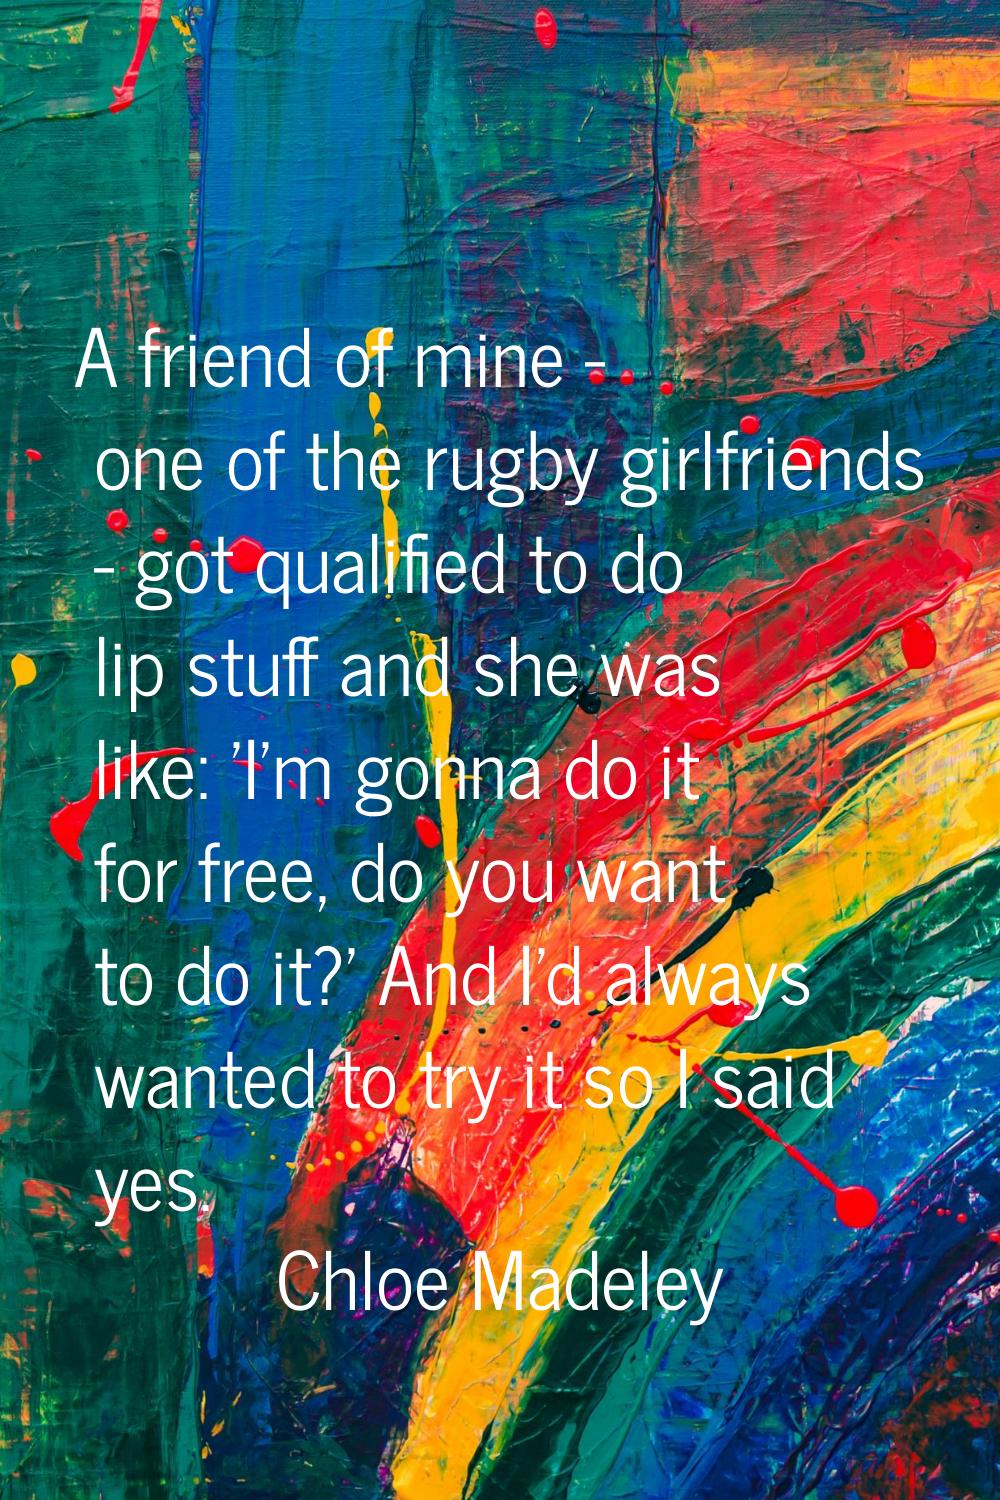 A friend of mine - one of the rugby girlfriends - got qualified to do lip stuff and she was like: '